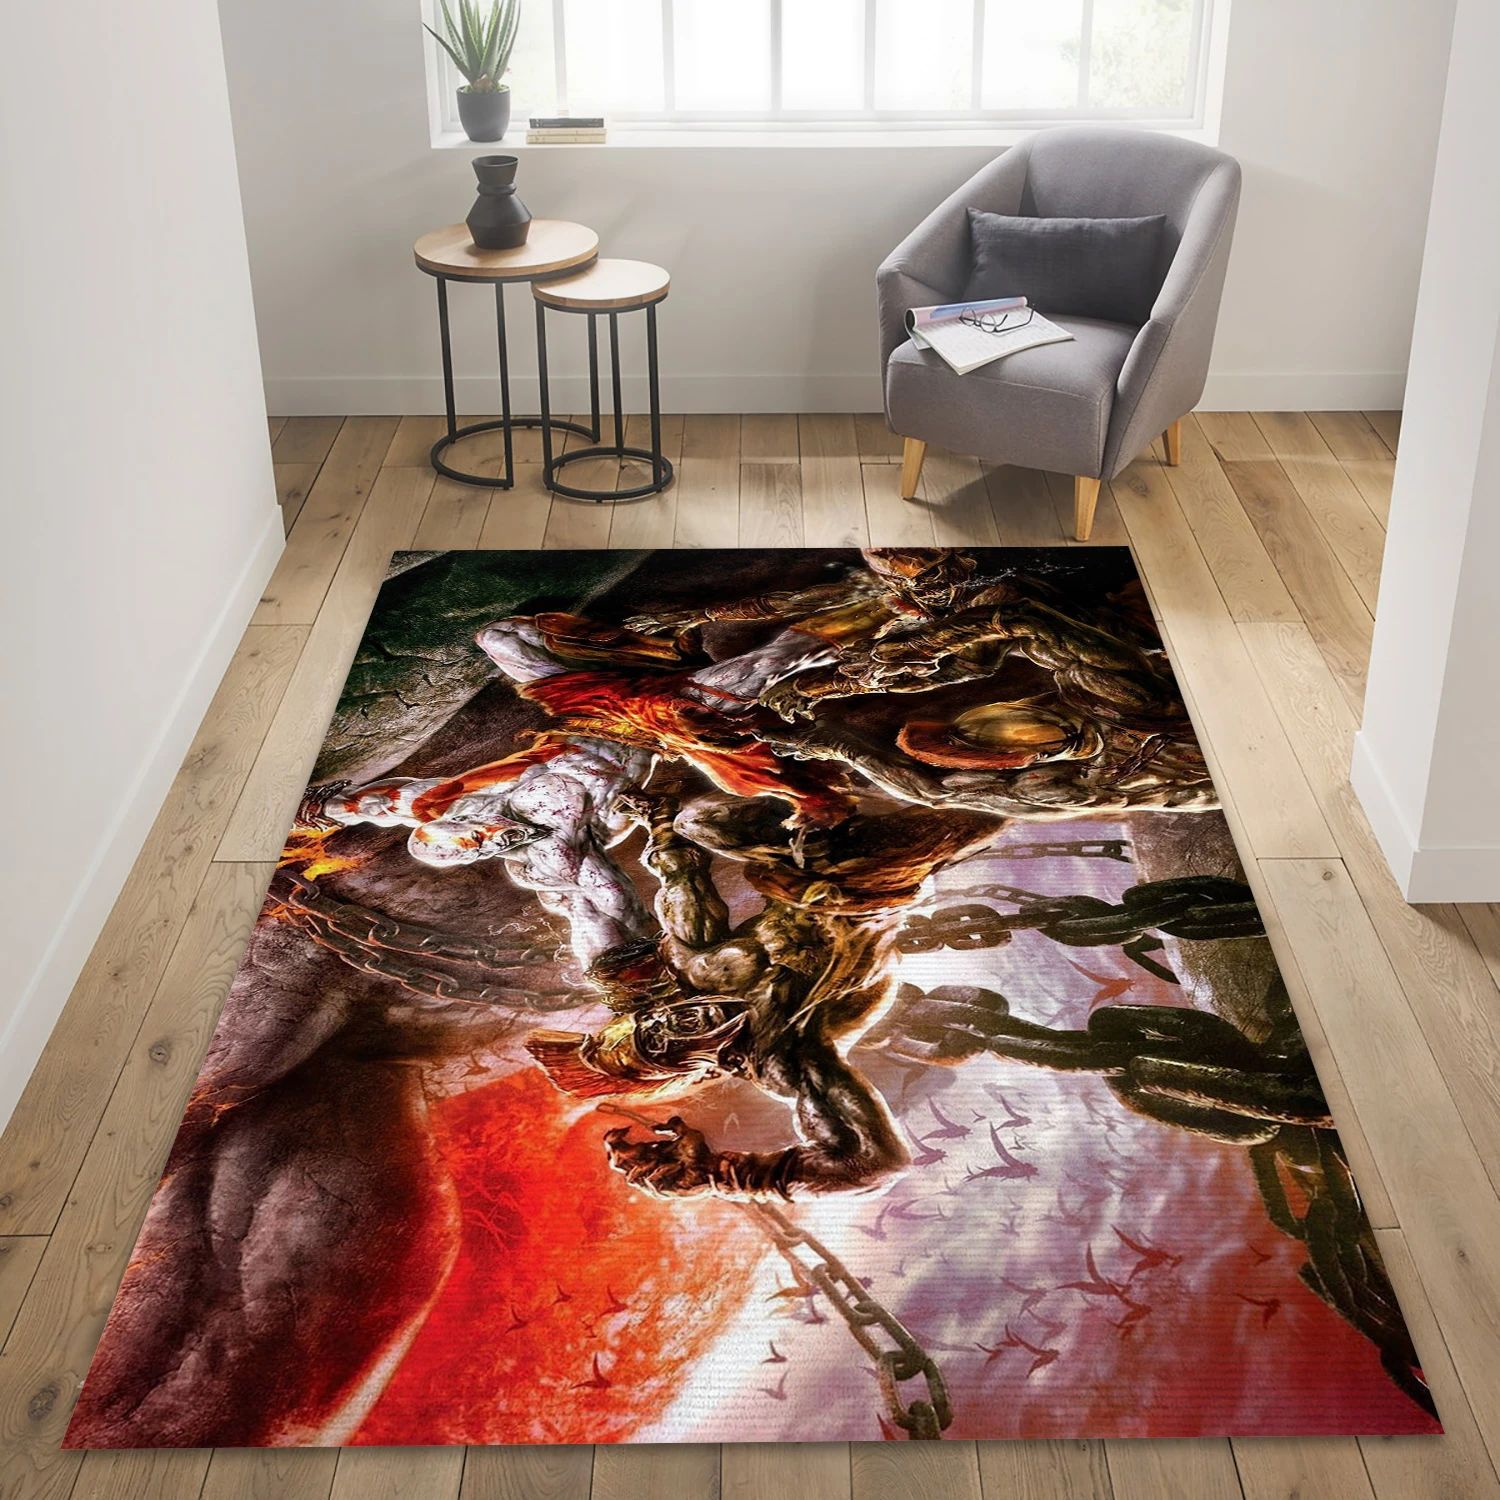 God Of War Video Game Area Rug Area, Living Room Rug - Christmas Gift Decor - Indoor Outdoor Rugs 3